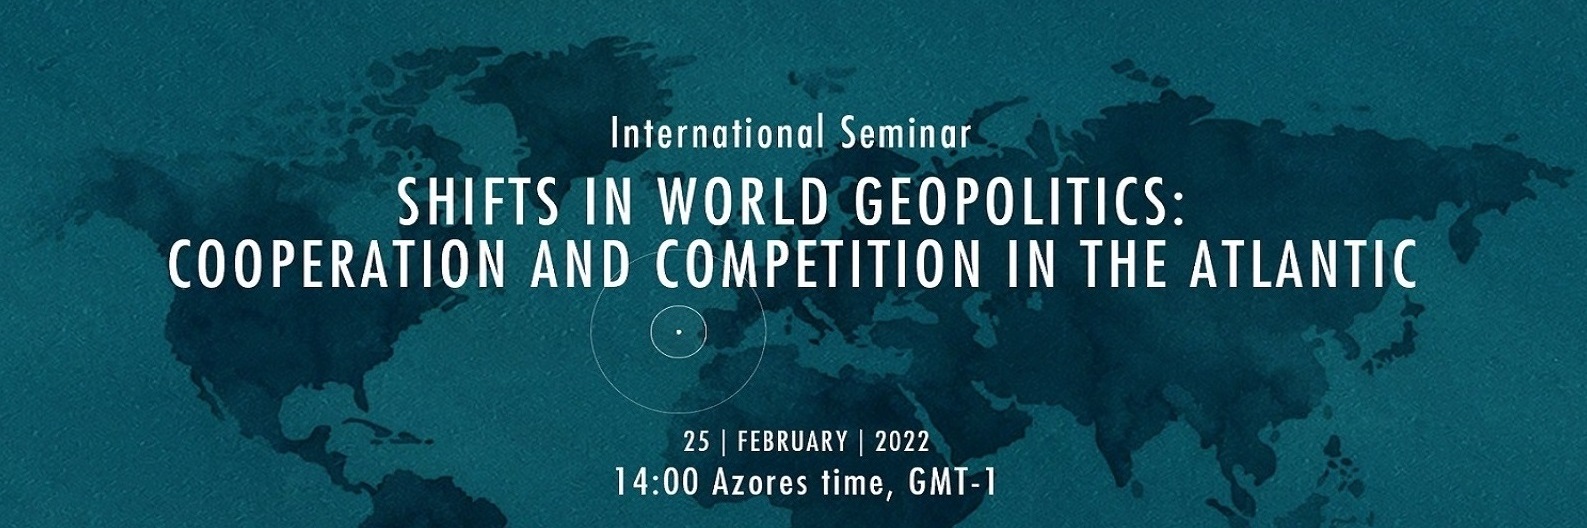 International Seminar “Shifts in world geopolitics: cooperation and competition in the Atlantic"